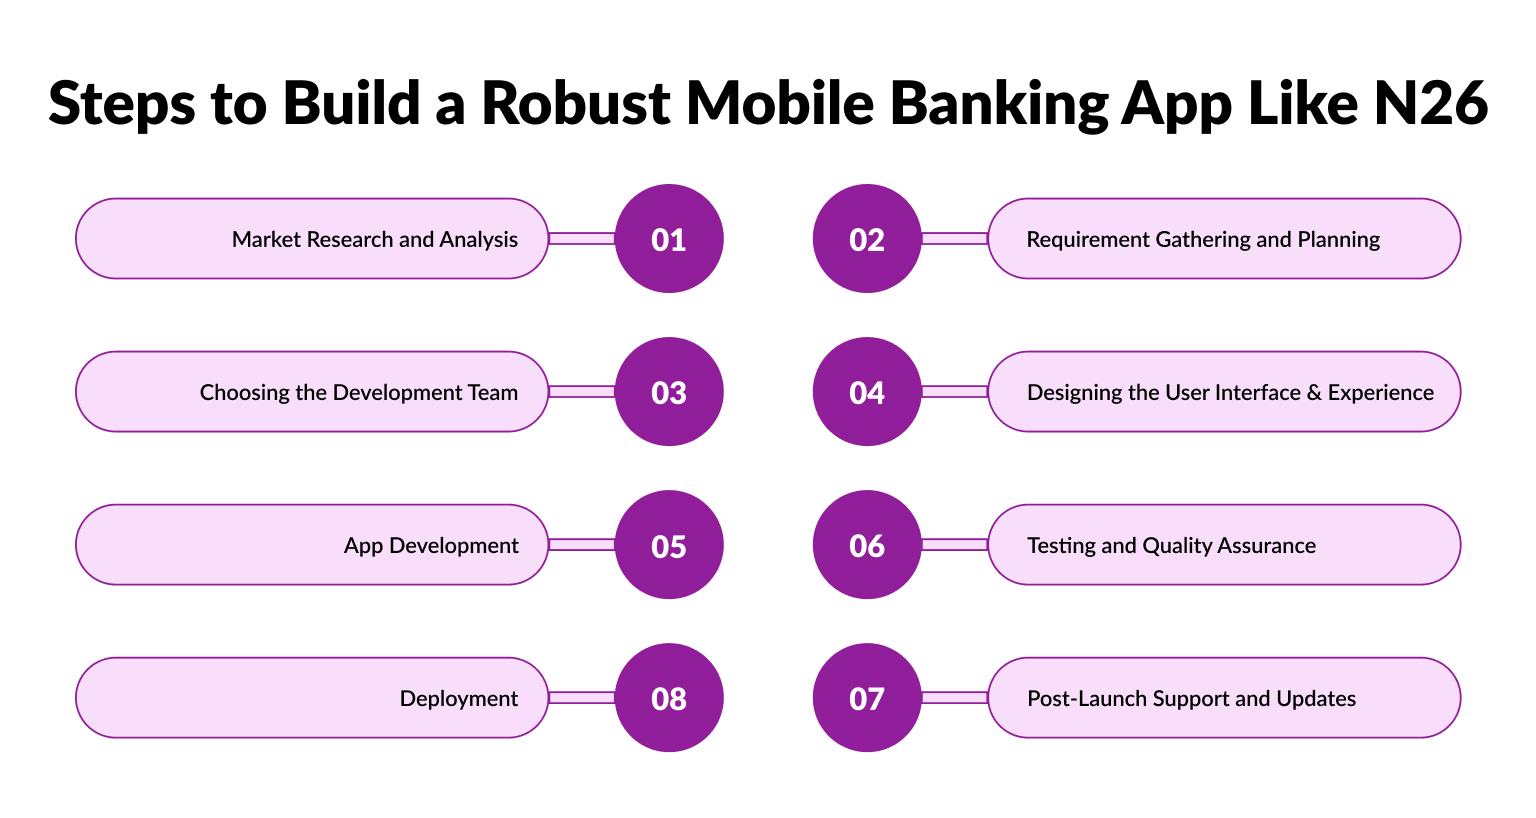 Steps to Build a Robust Mobile Banking App Like N26